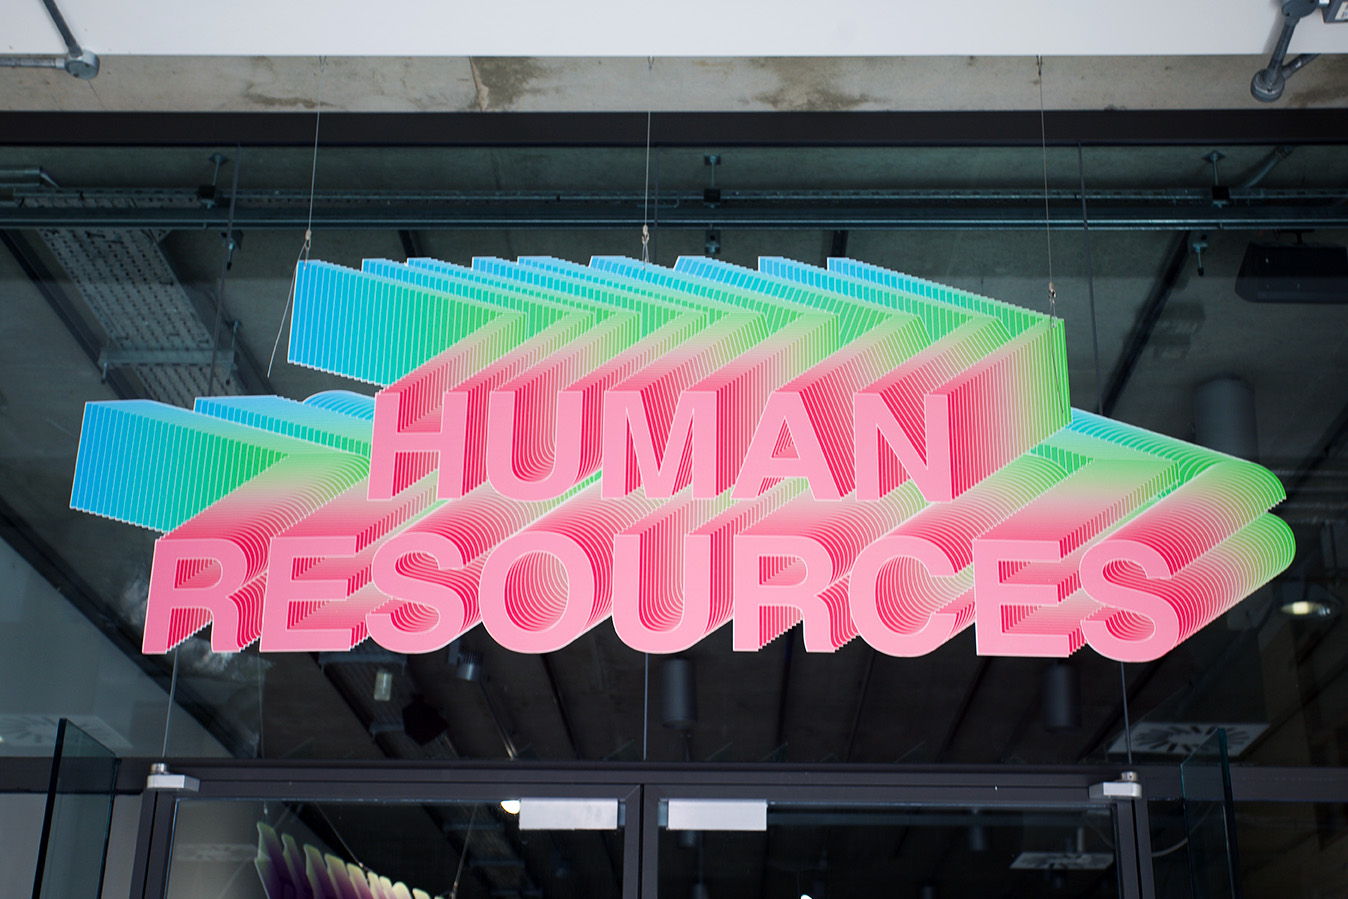 alt: A large sign hanging from a ceiling, the sign, made in response to the provocation of the project, uses clip art styling and layering of the Human Resources title